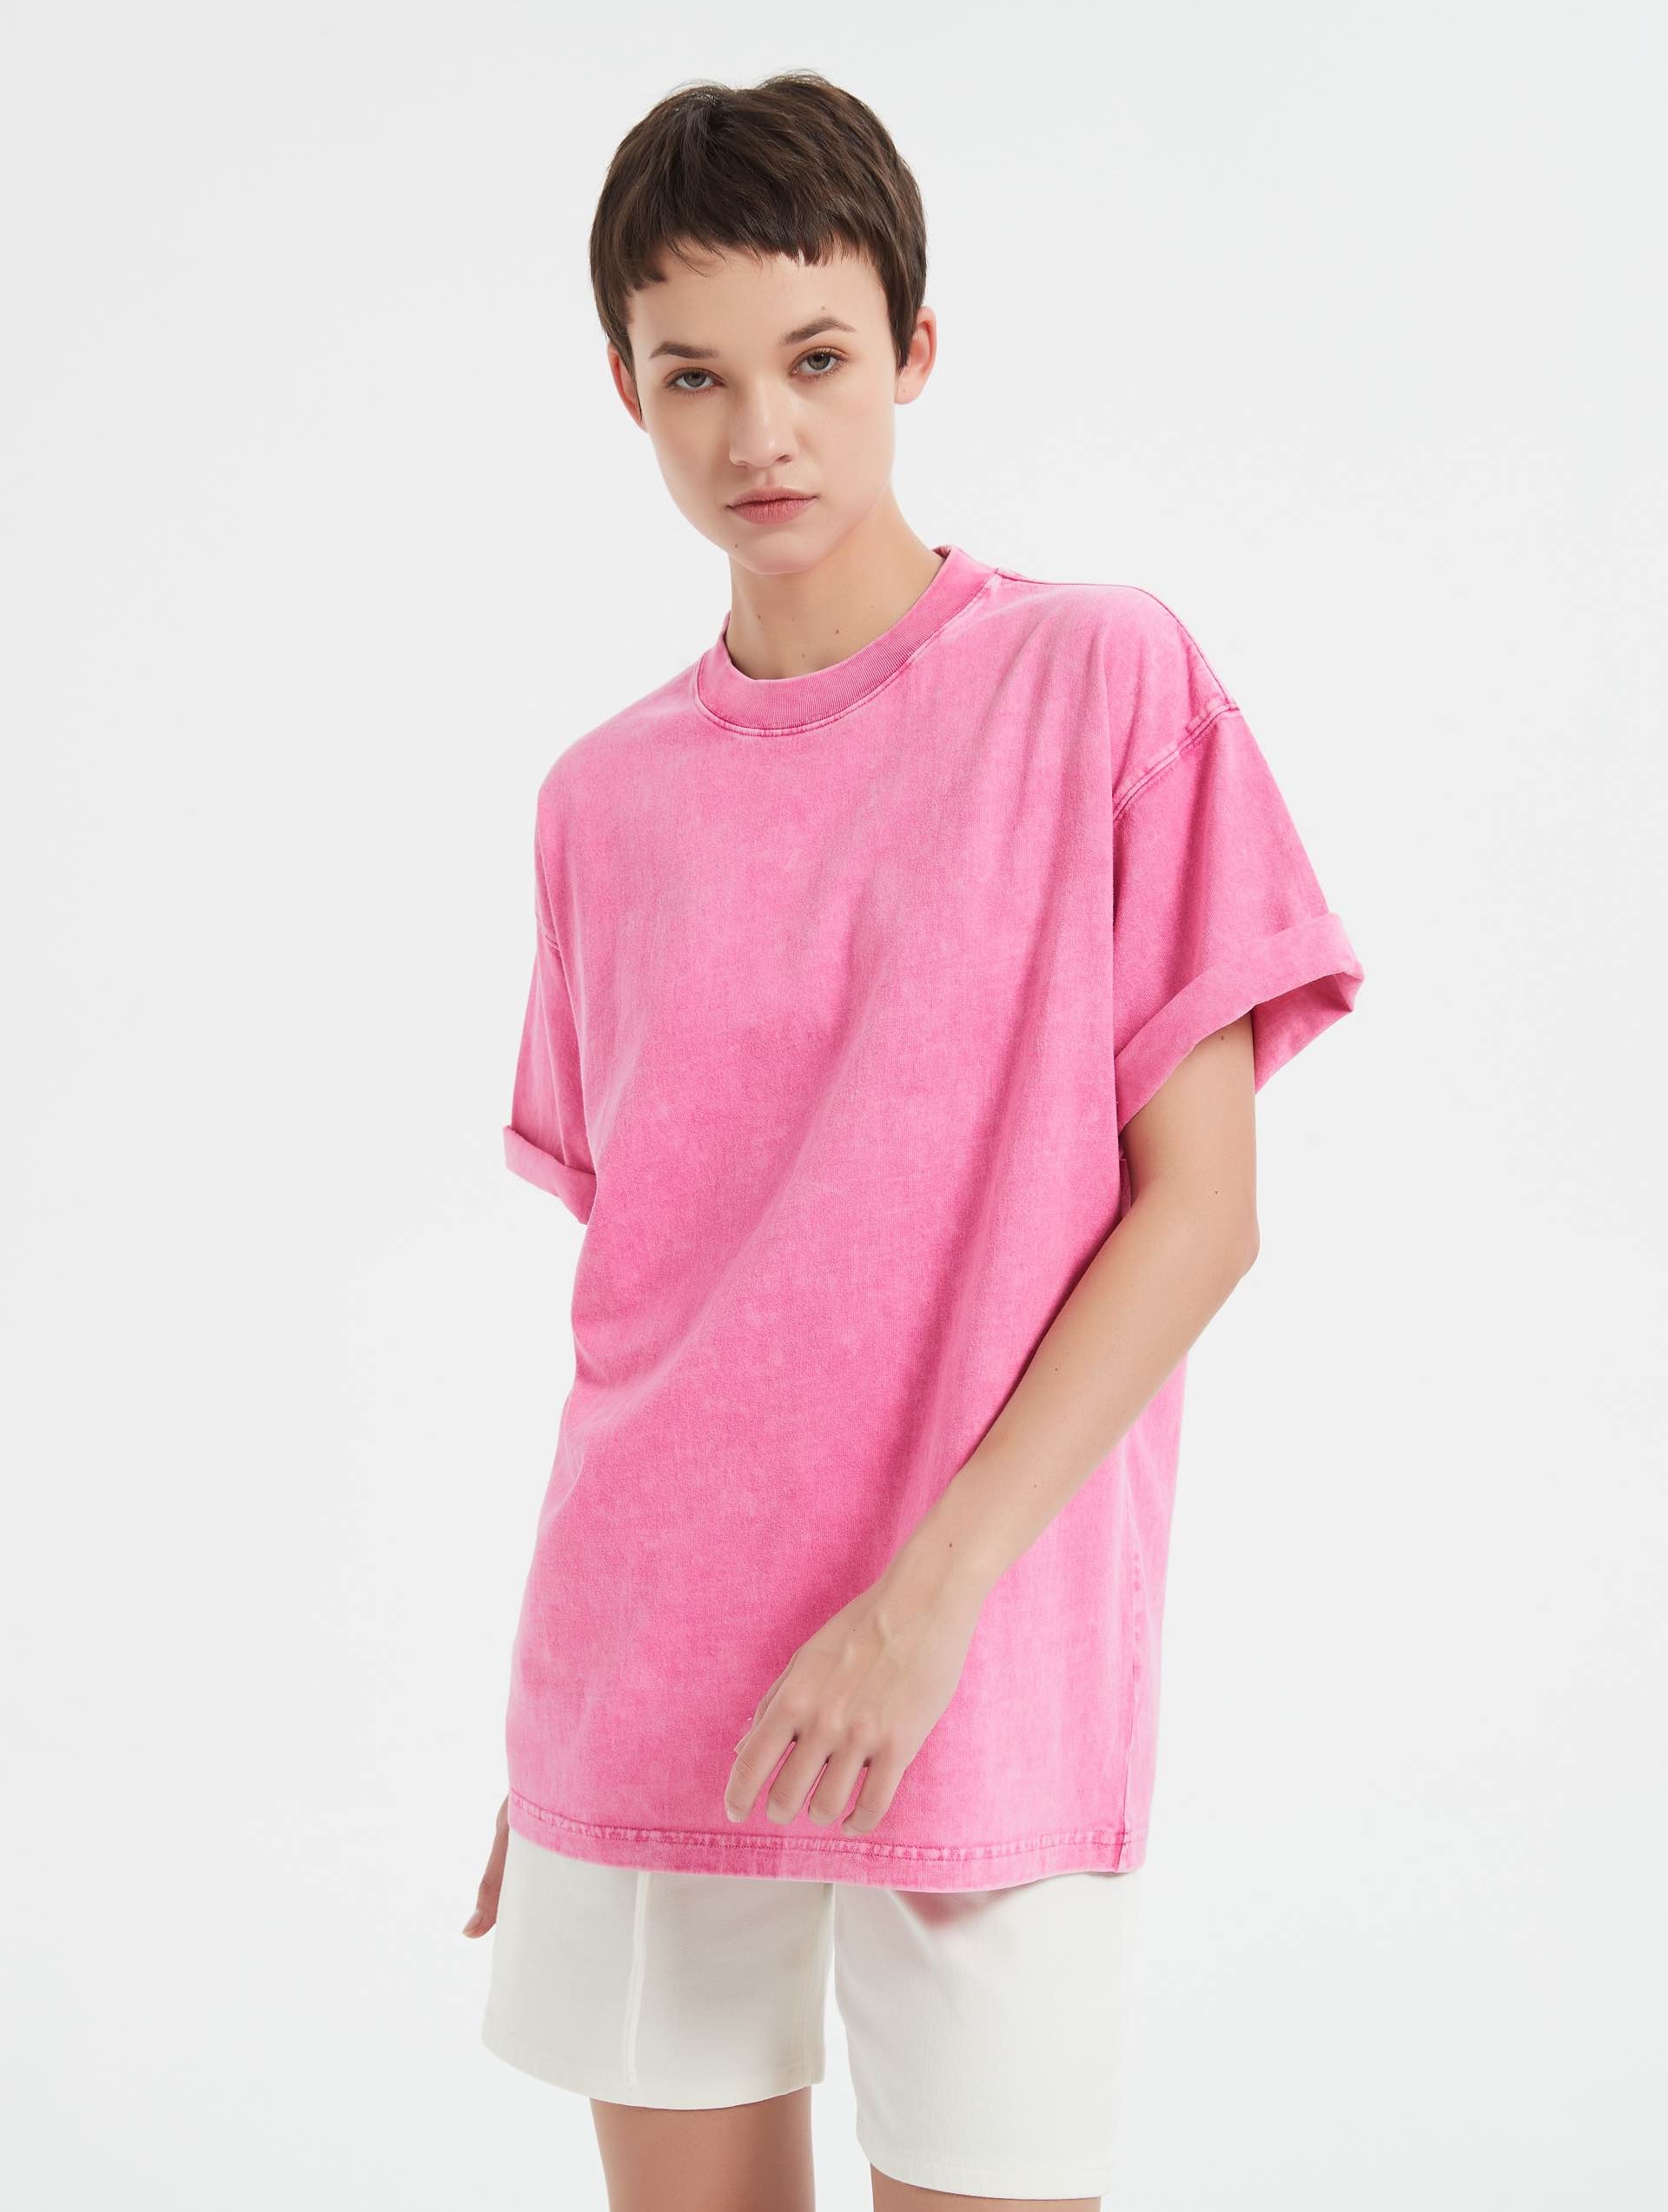 Issi T-shirt - Pink